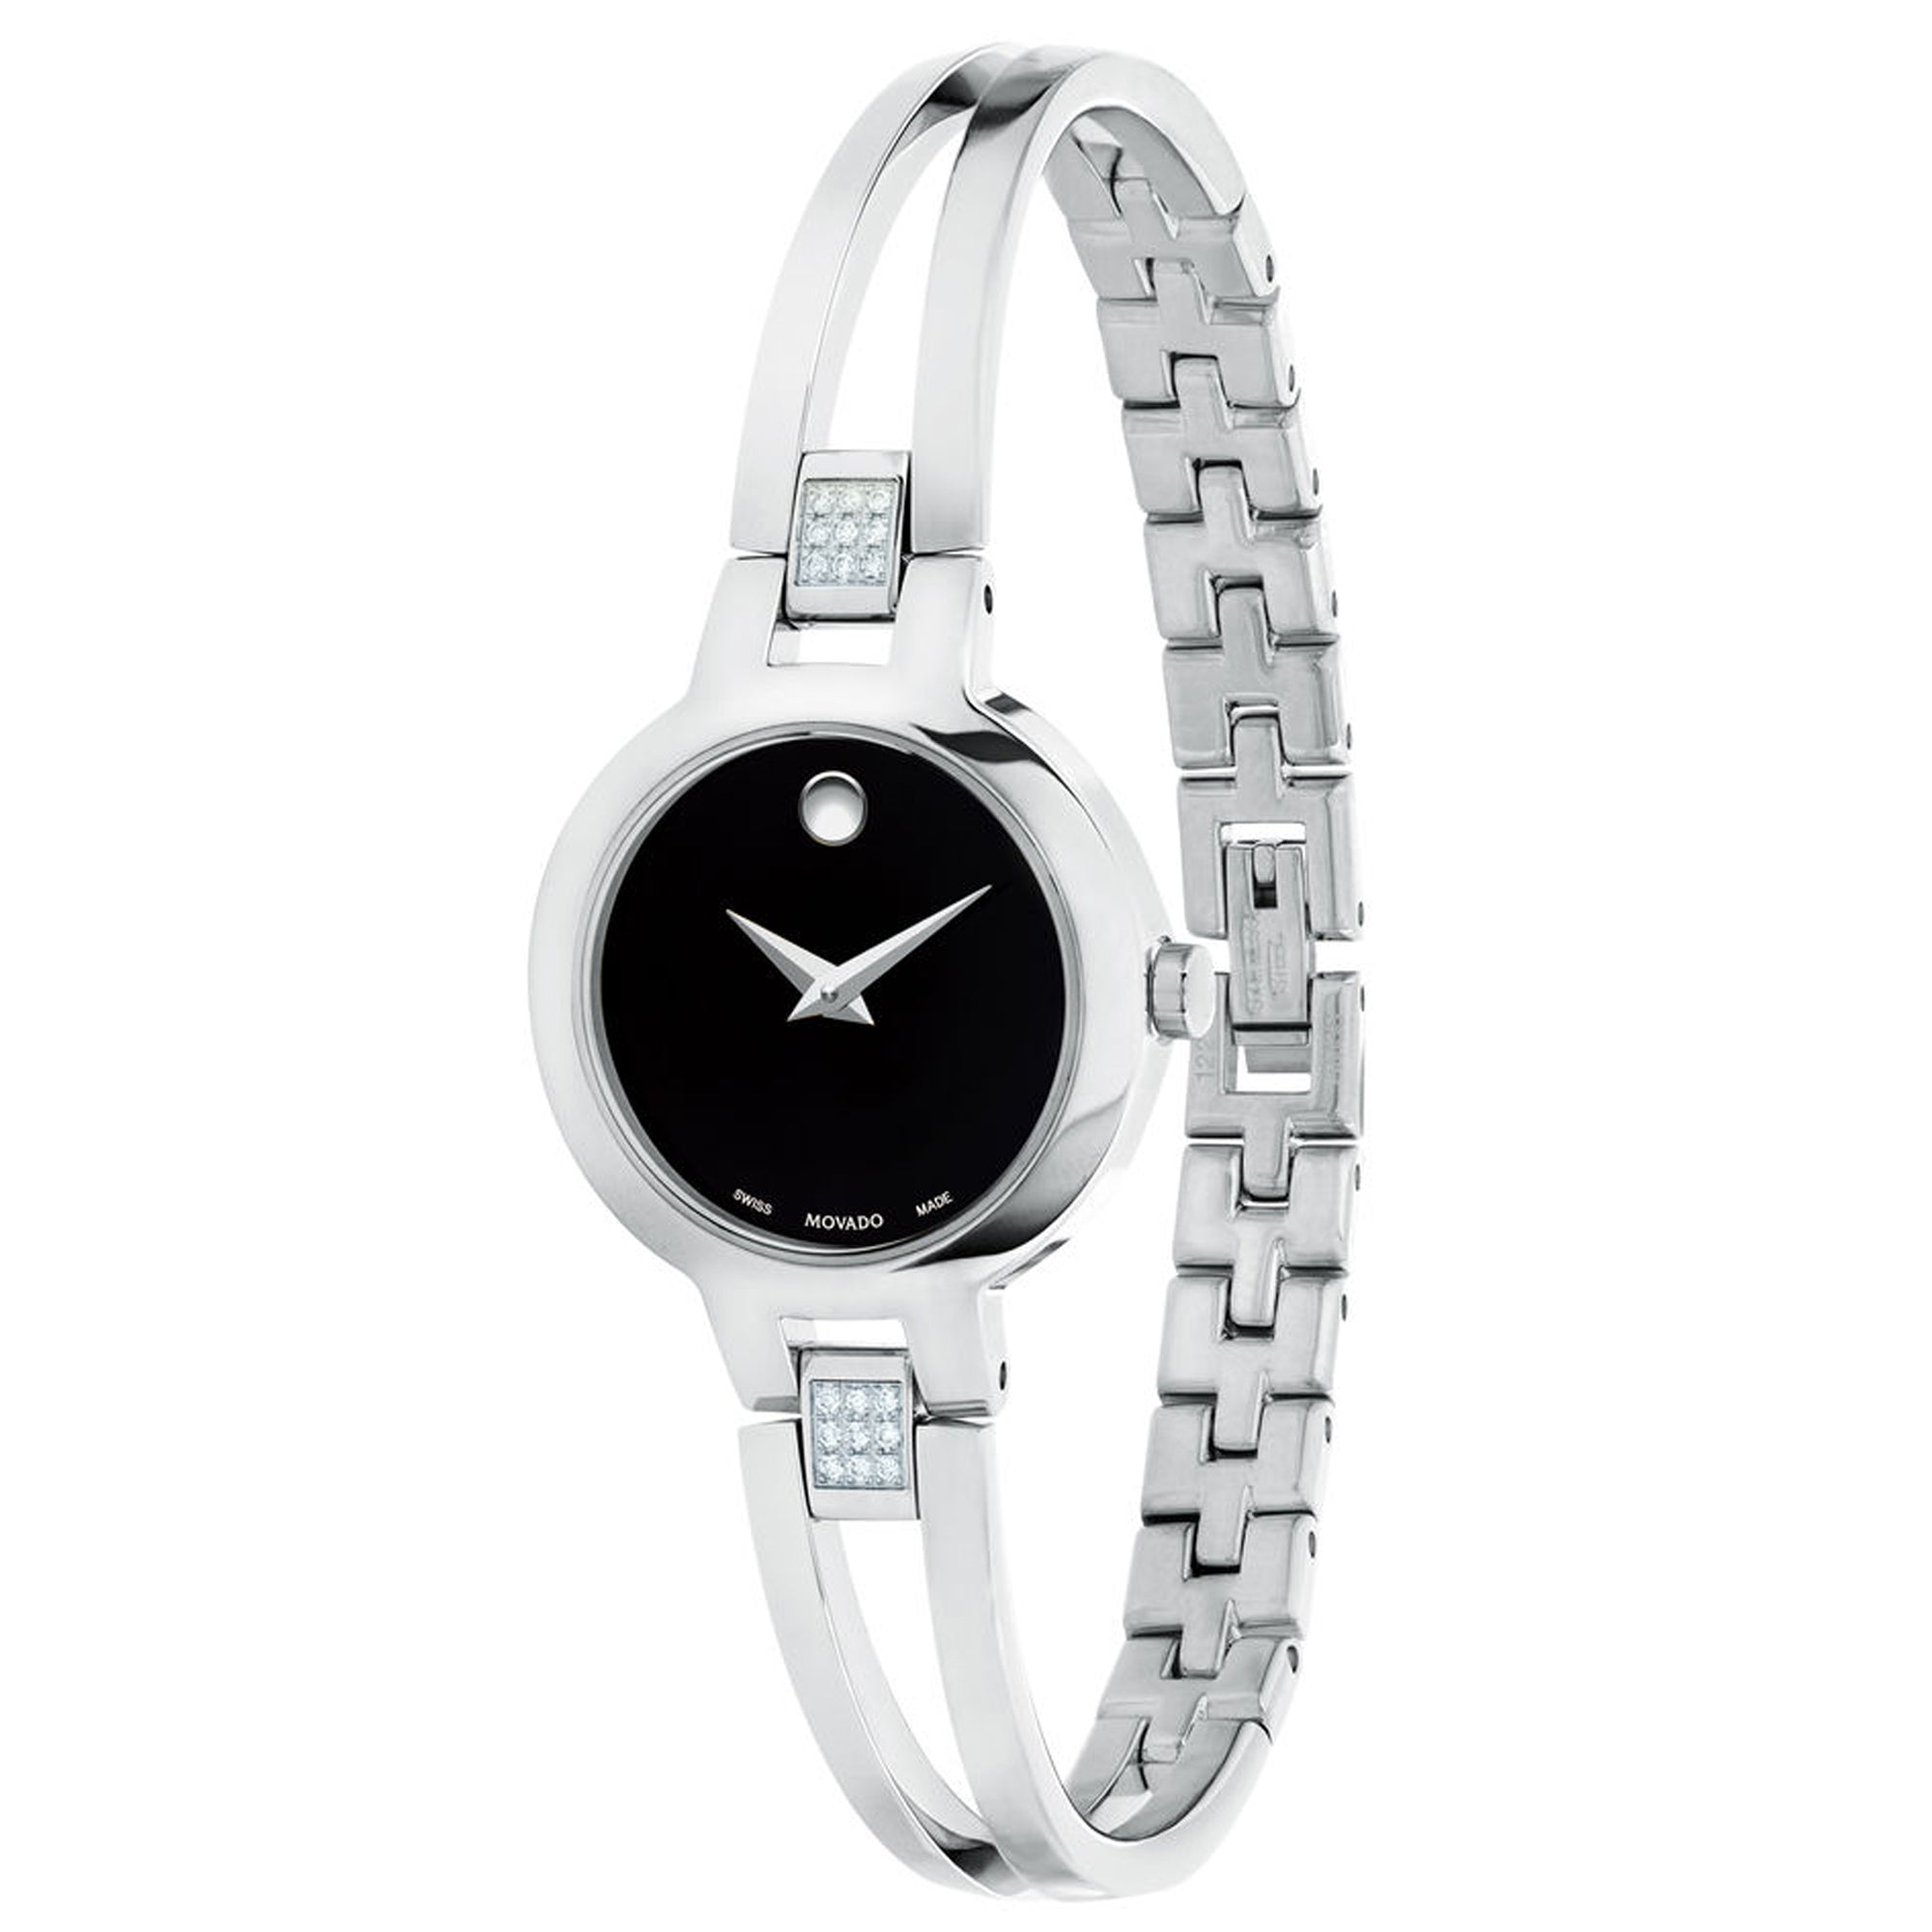 Movado Amorosa Womens Diamond Watch with Black Dial and Stainless Steel Bangle Bracelet (Swiss quartz movement)